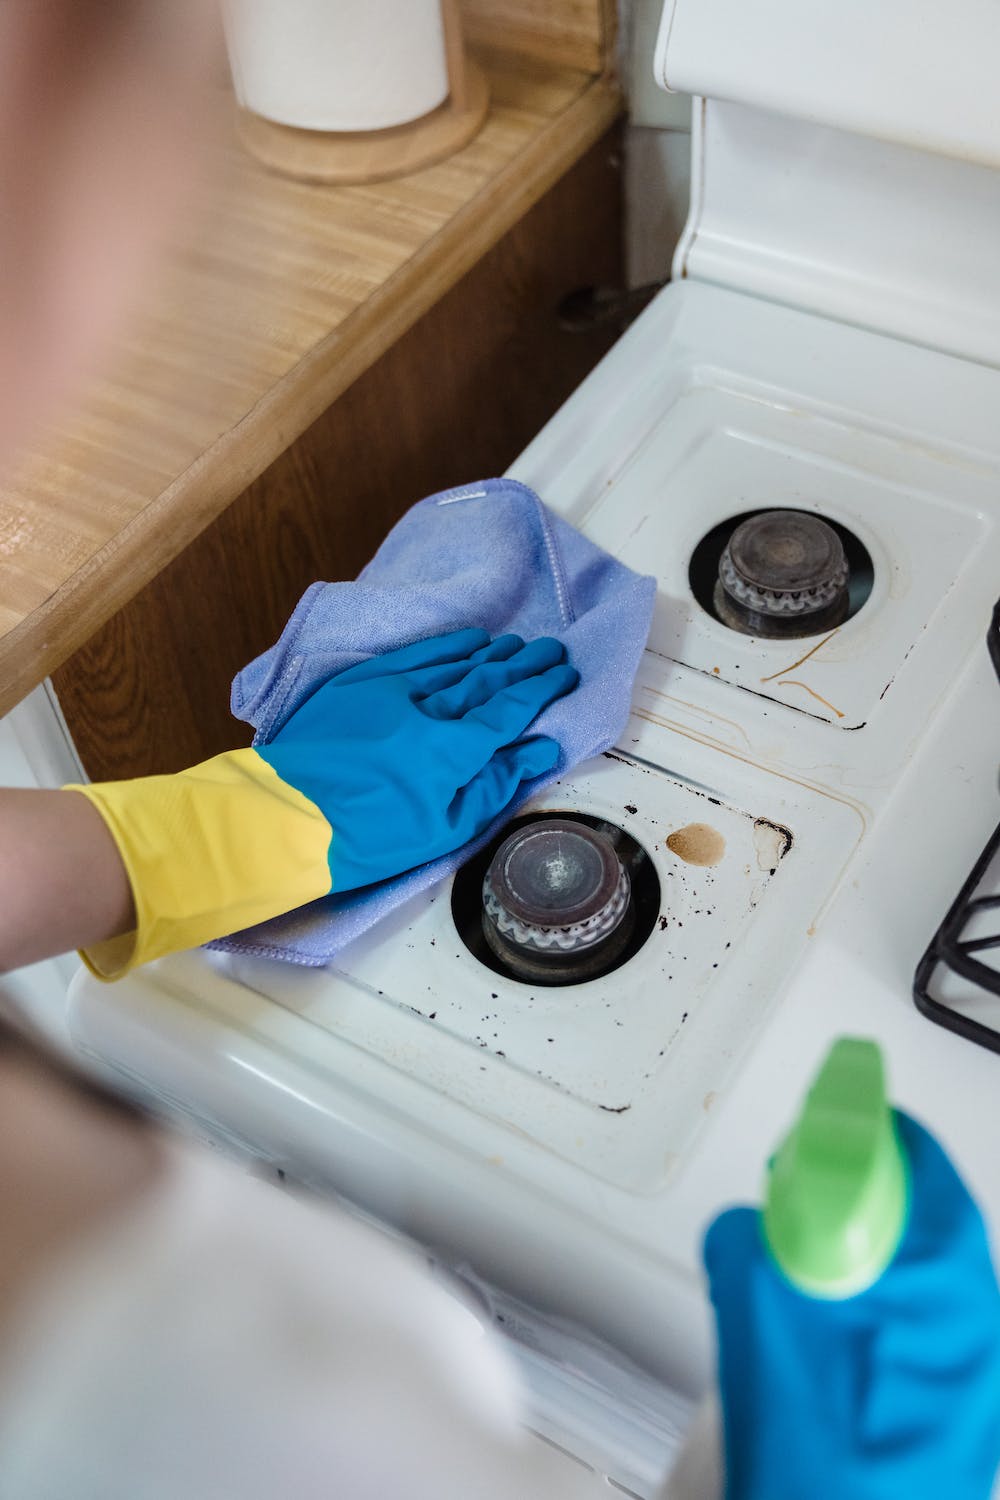 The Therapeutic Side of Cleaning: Mental Health Benefits for Refugees